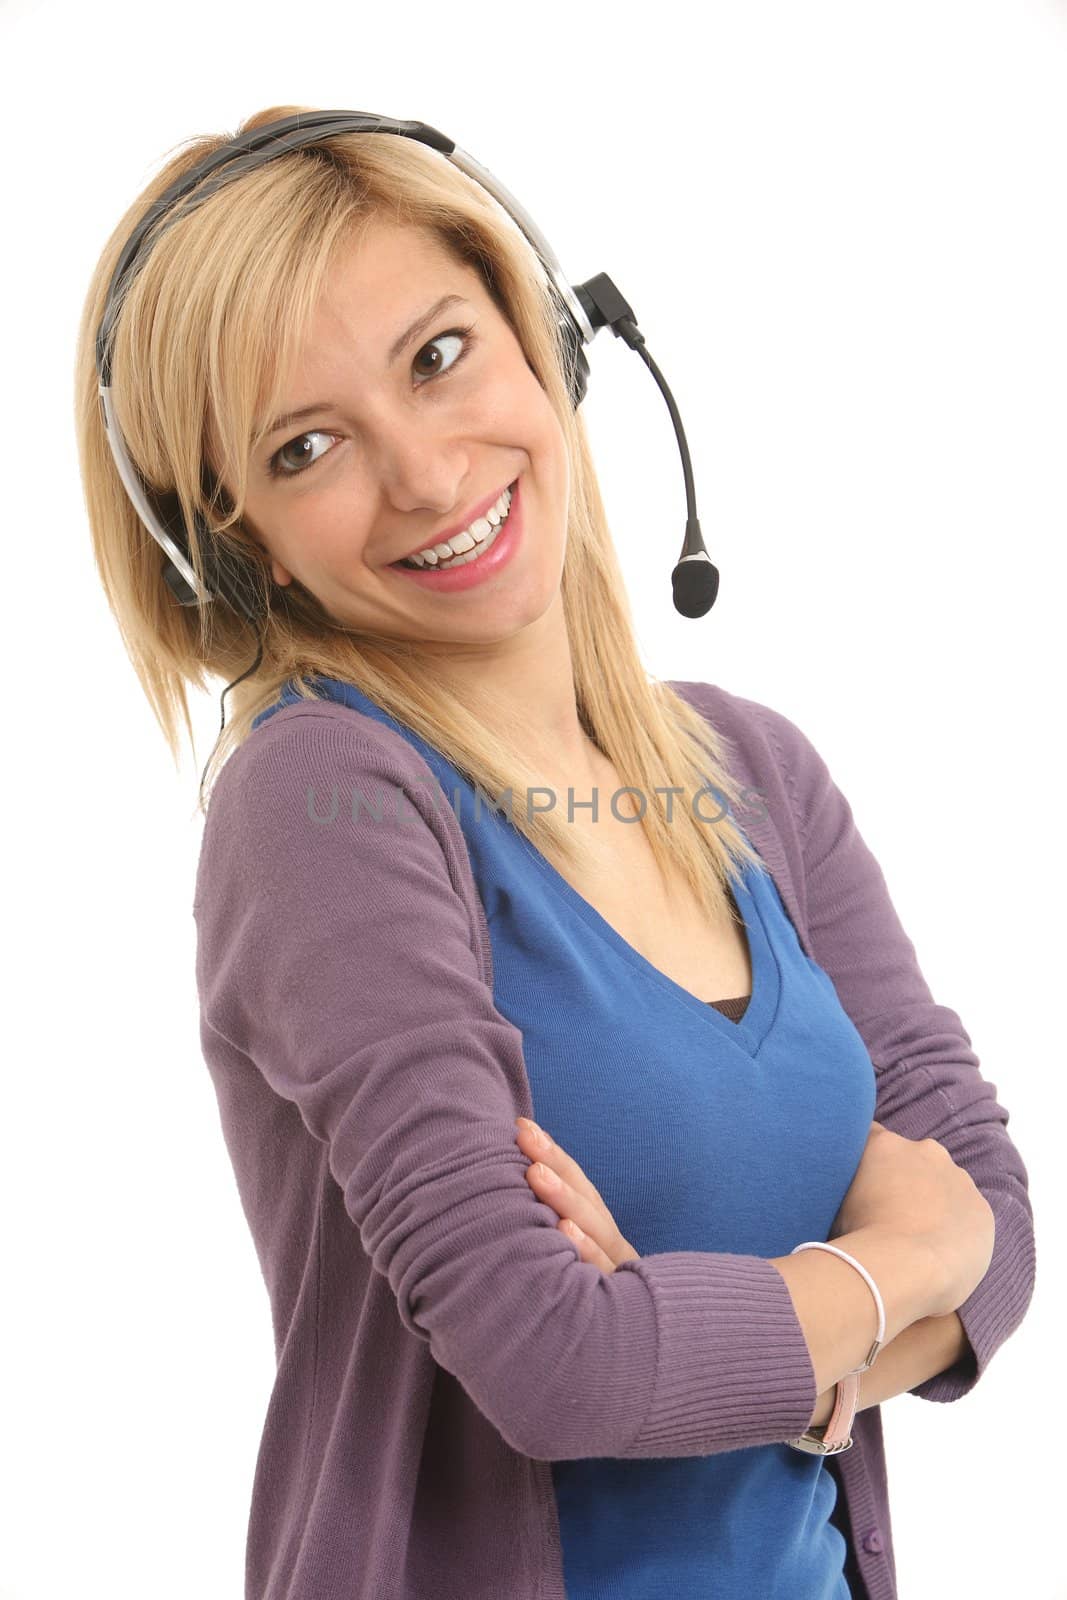 Customer care assistant by shamtor